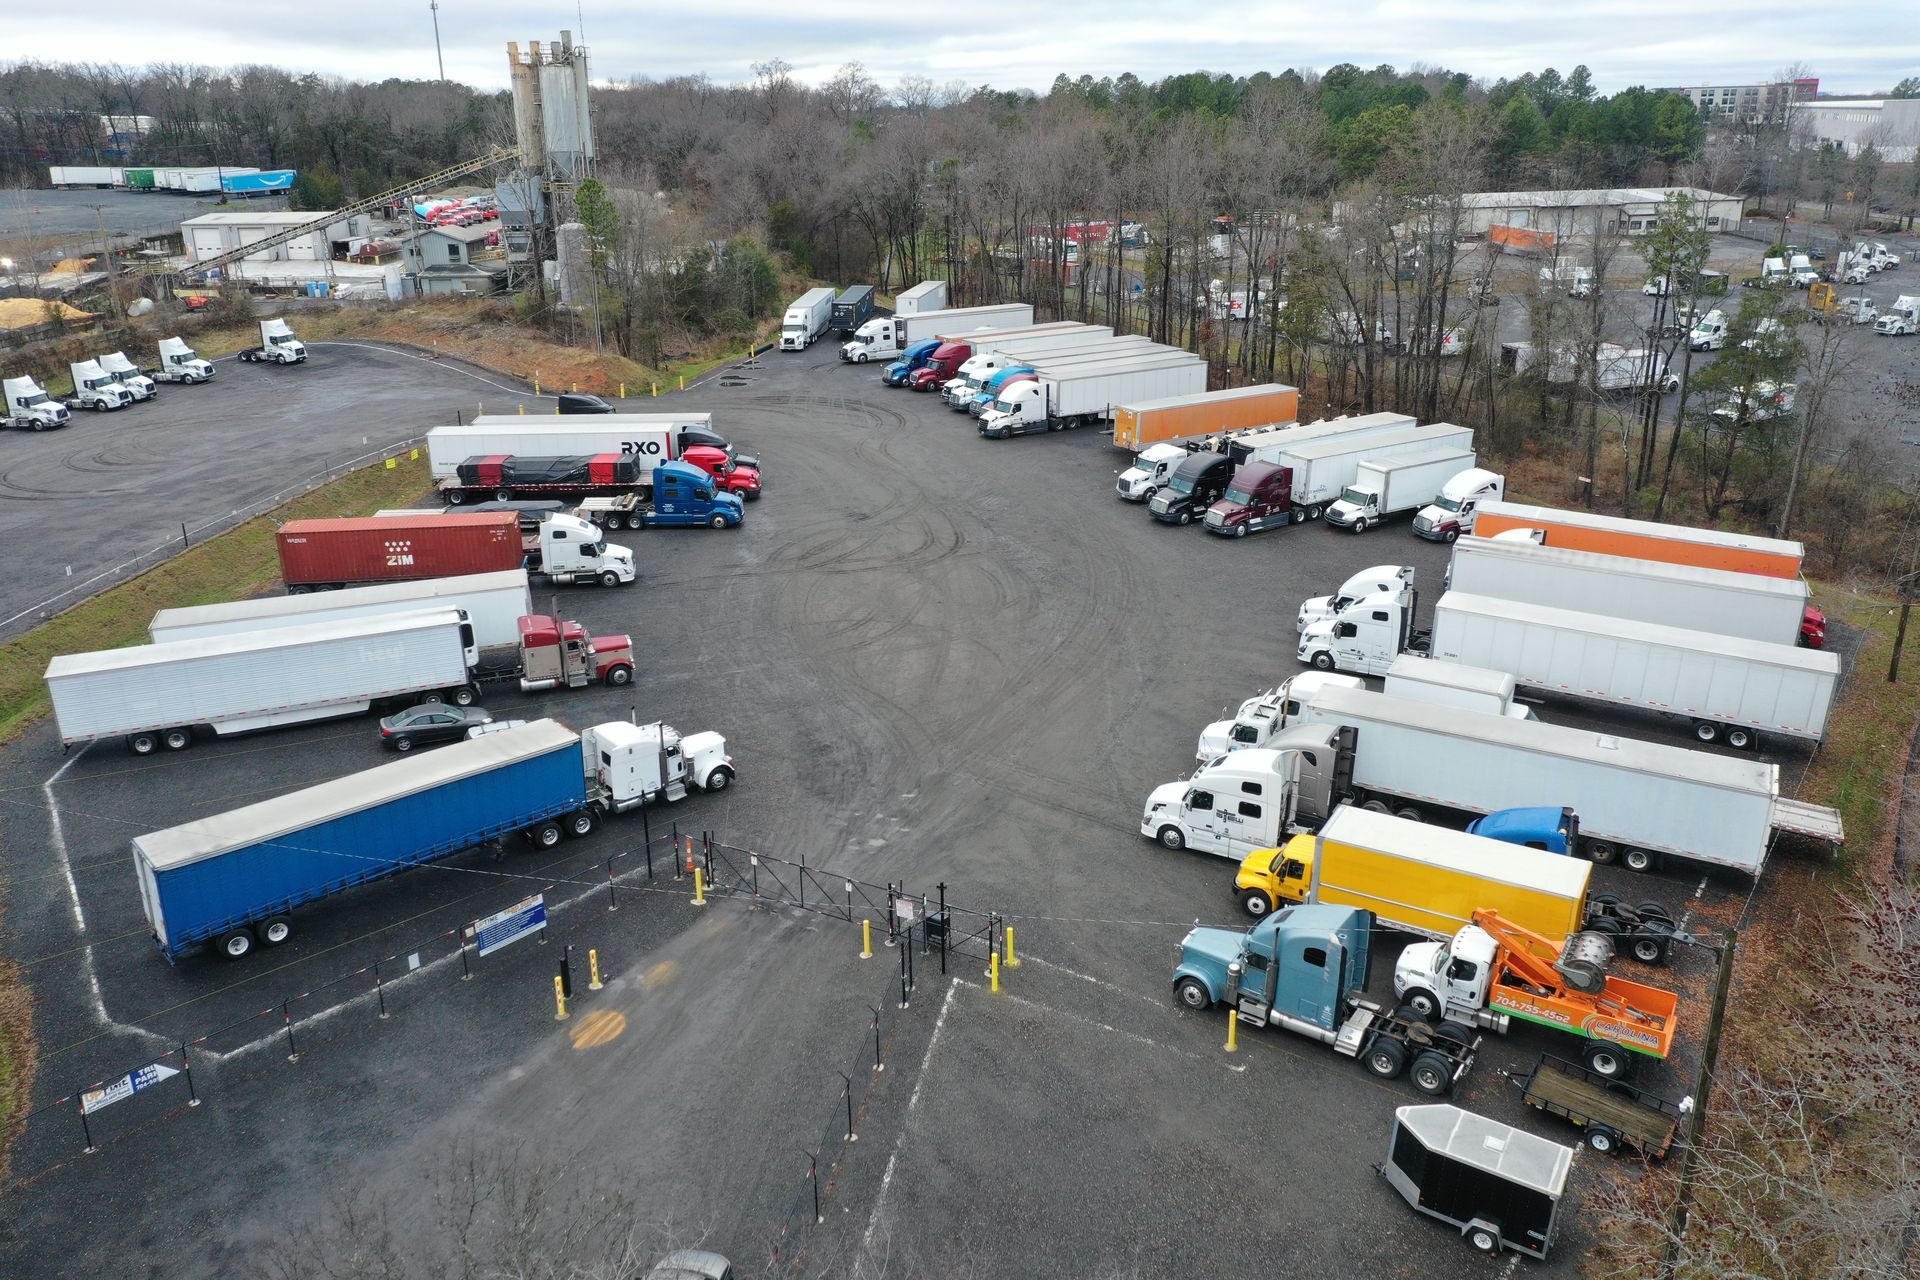 An aerial view of a lot of trucks parked in a parking lot.